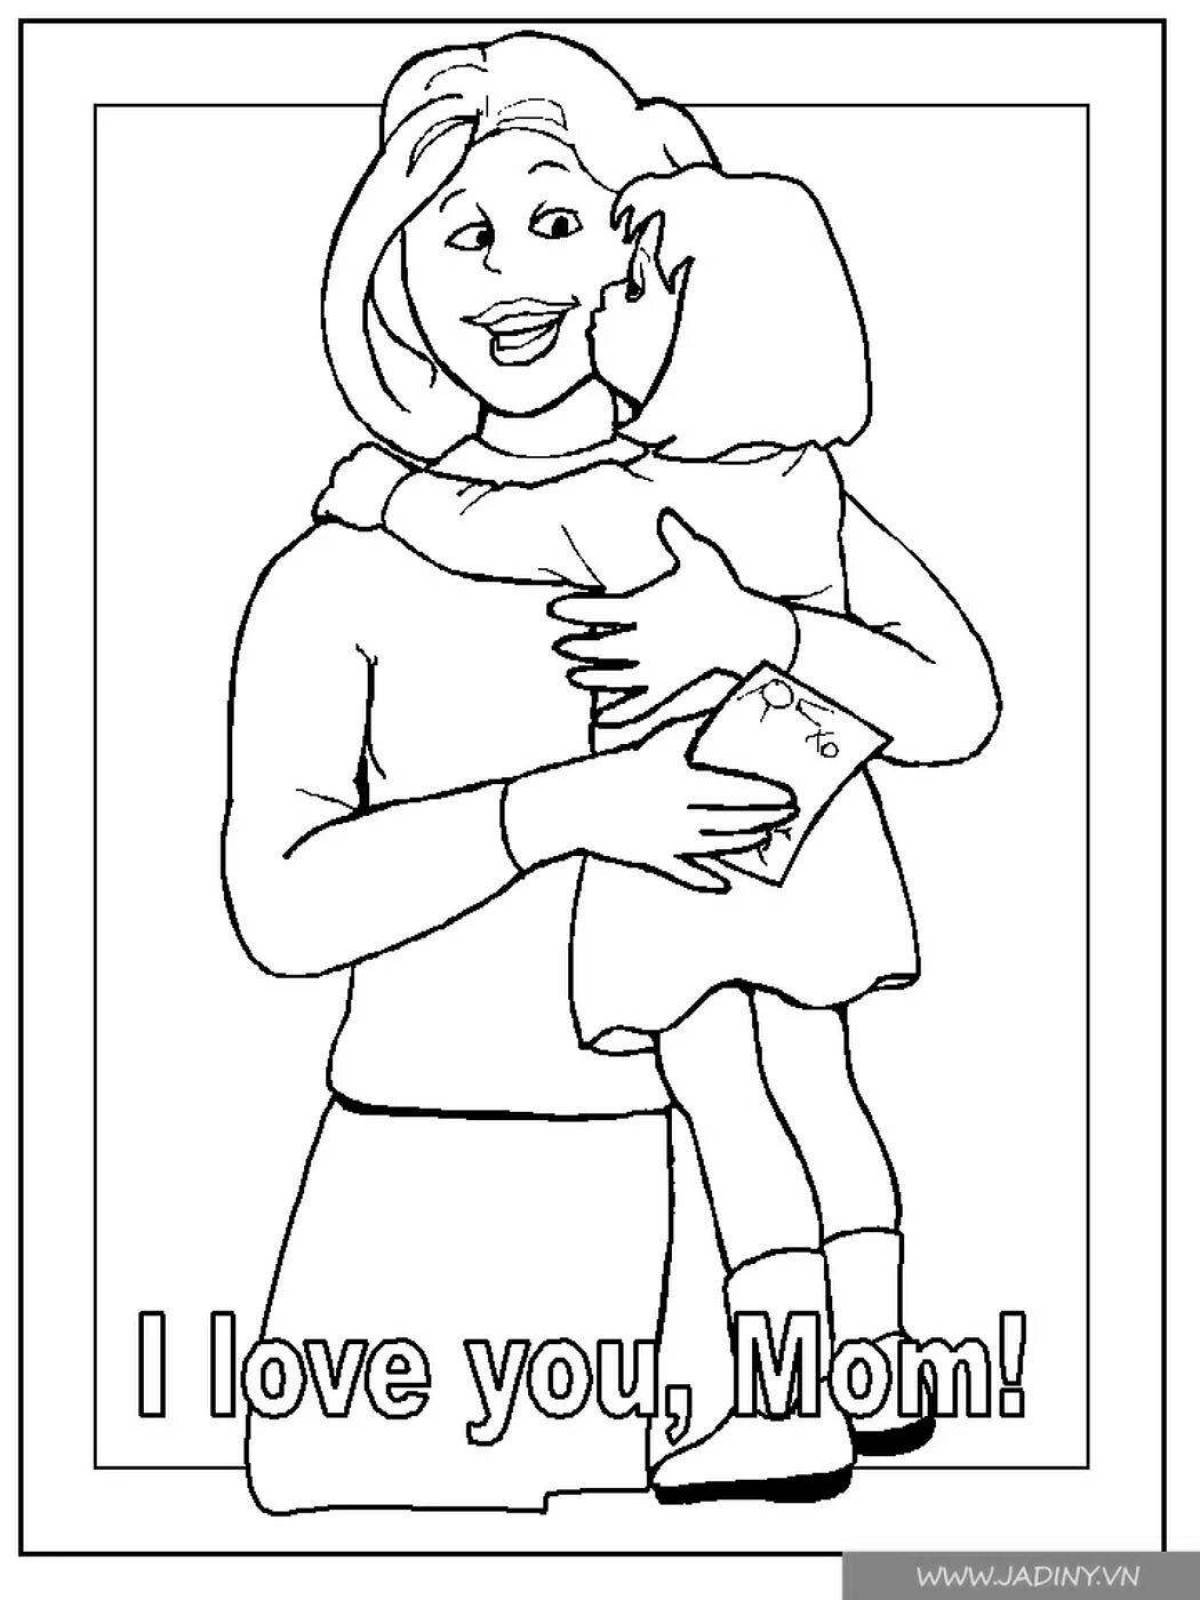 Awesome mom coloring pages